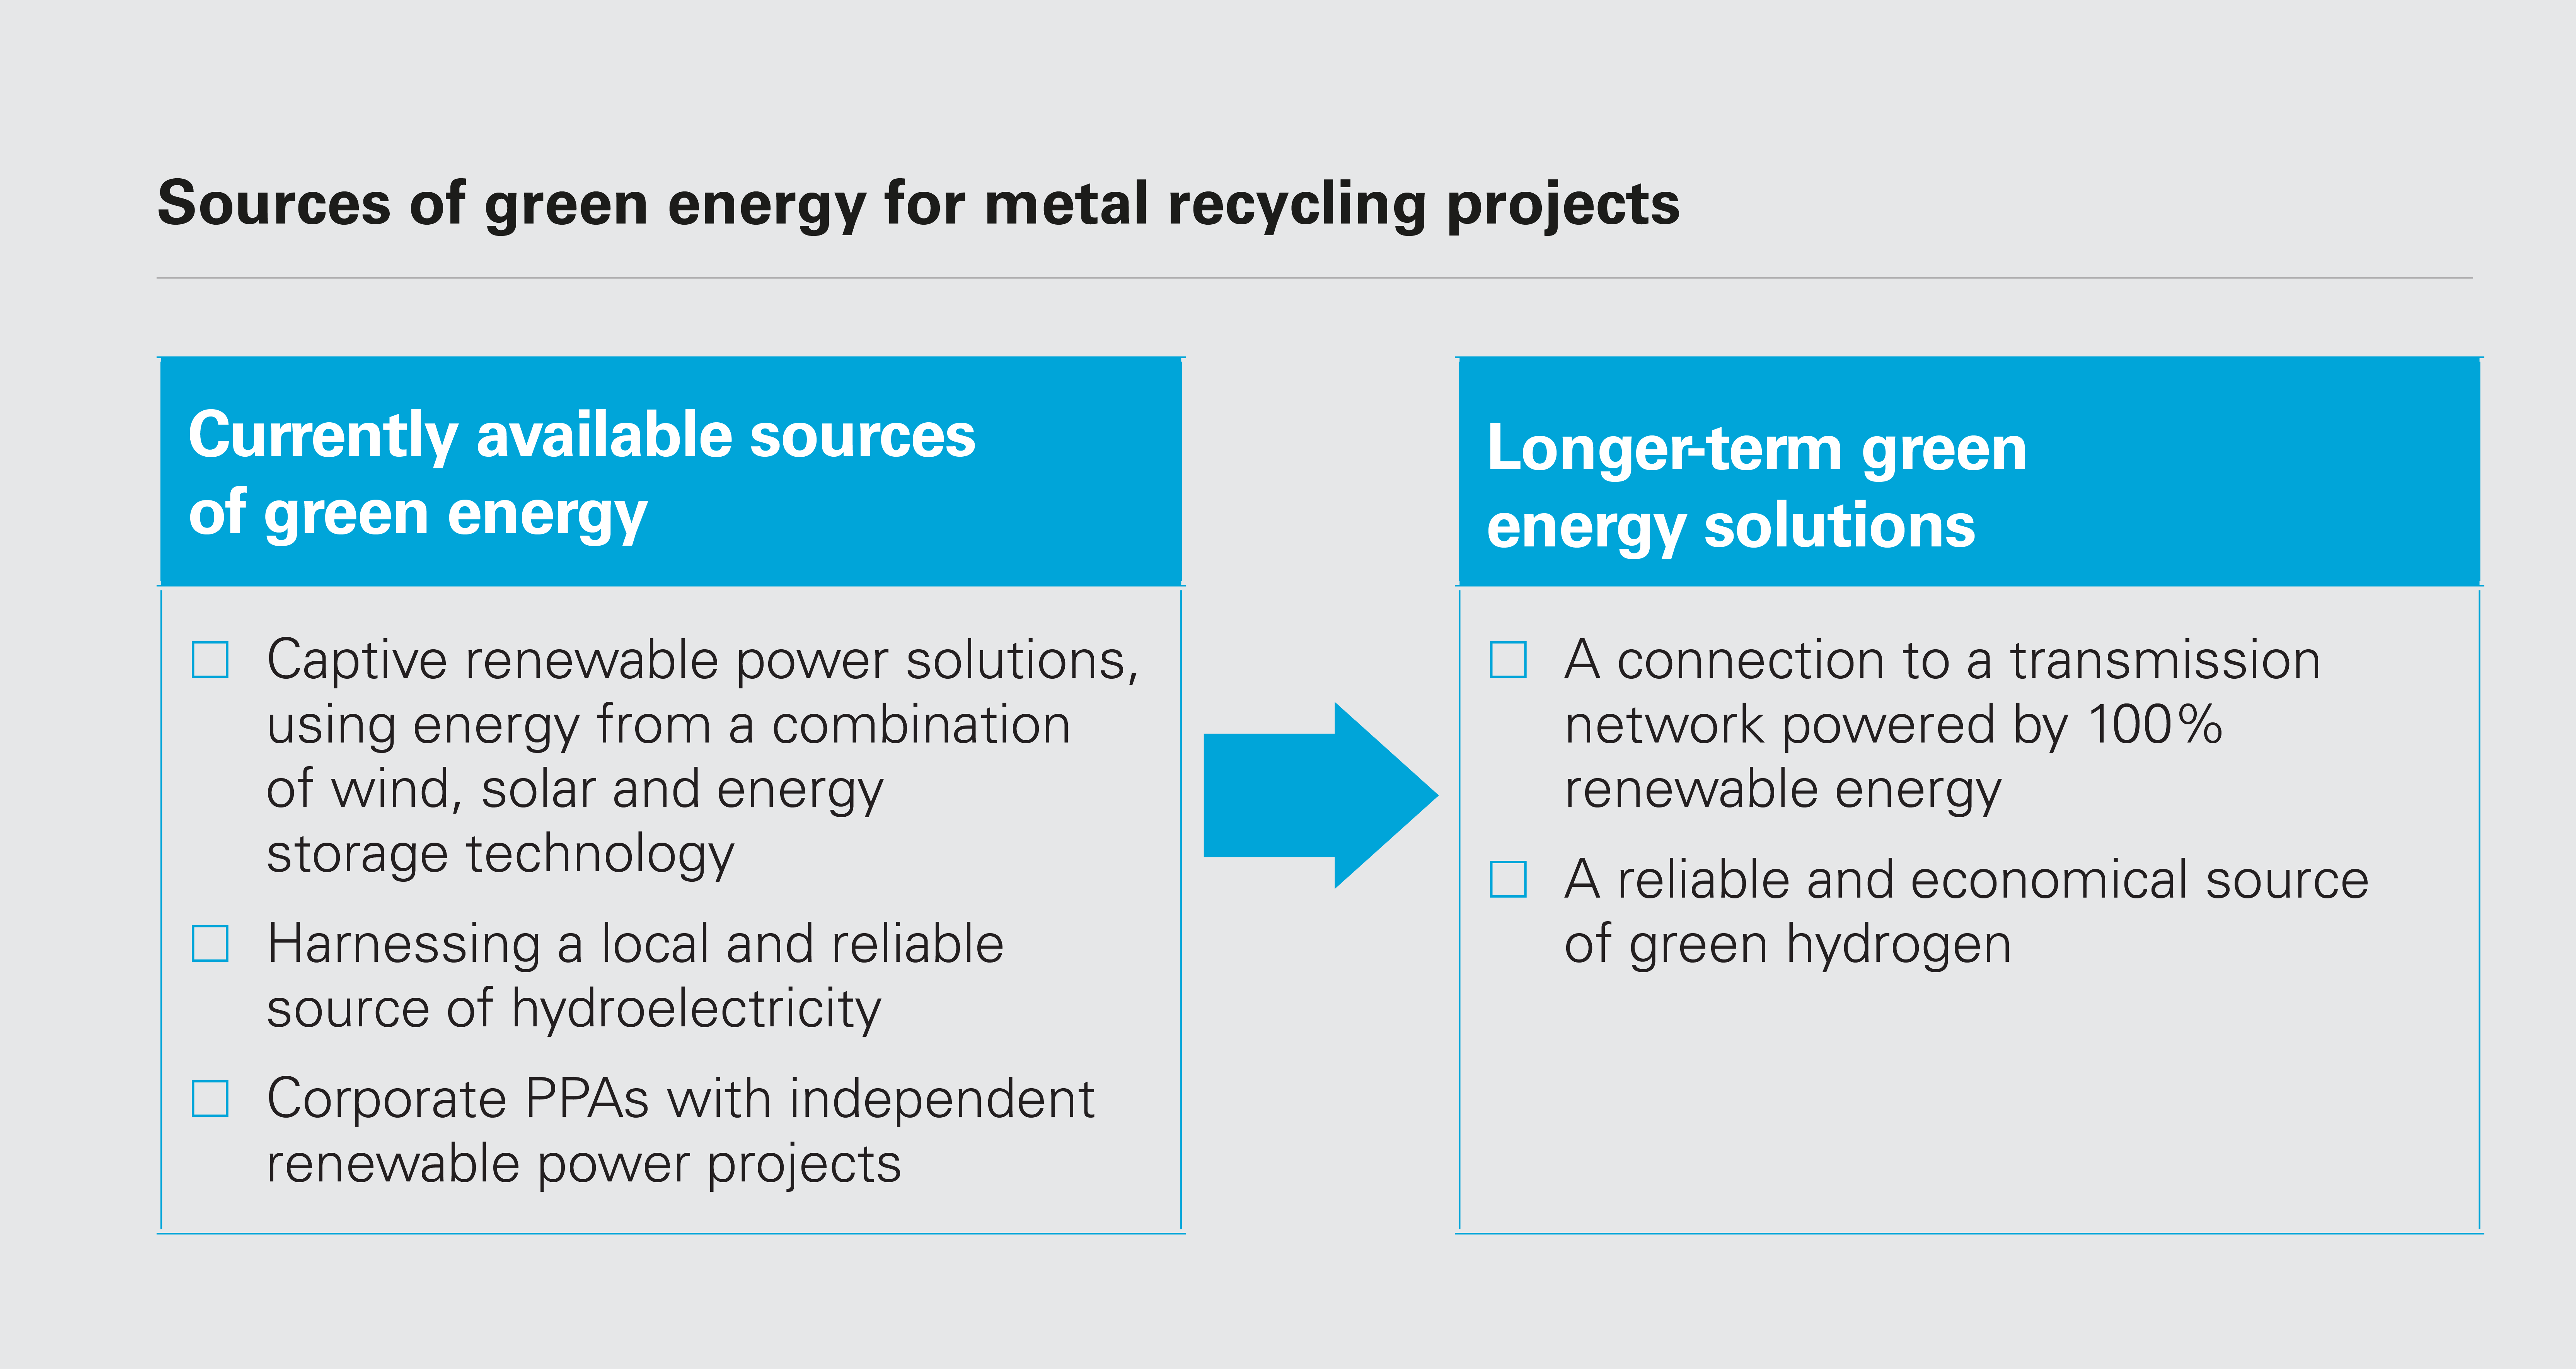 Sources of green energy for metal recycling projects (PDF)